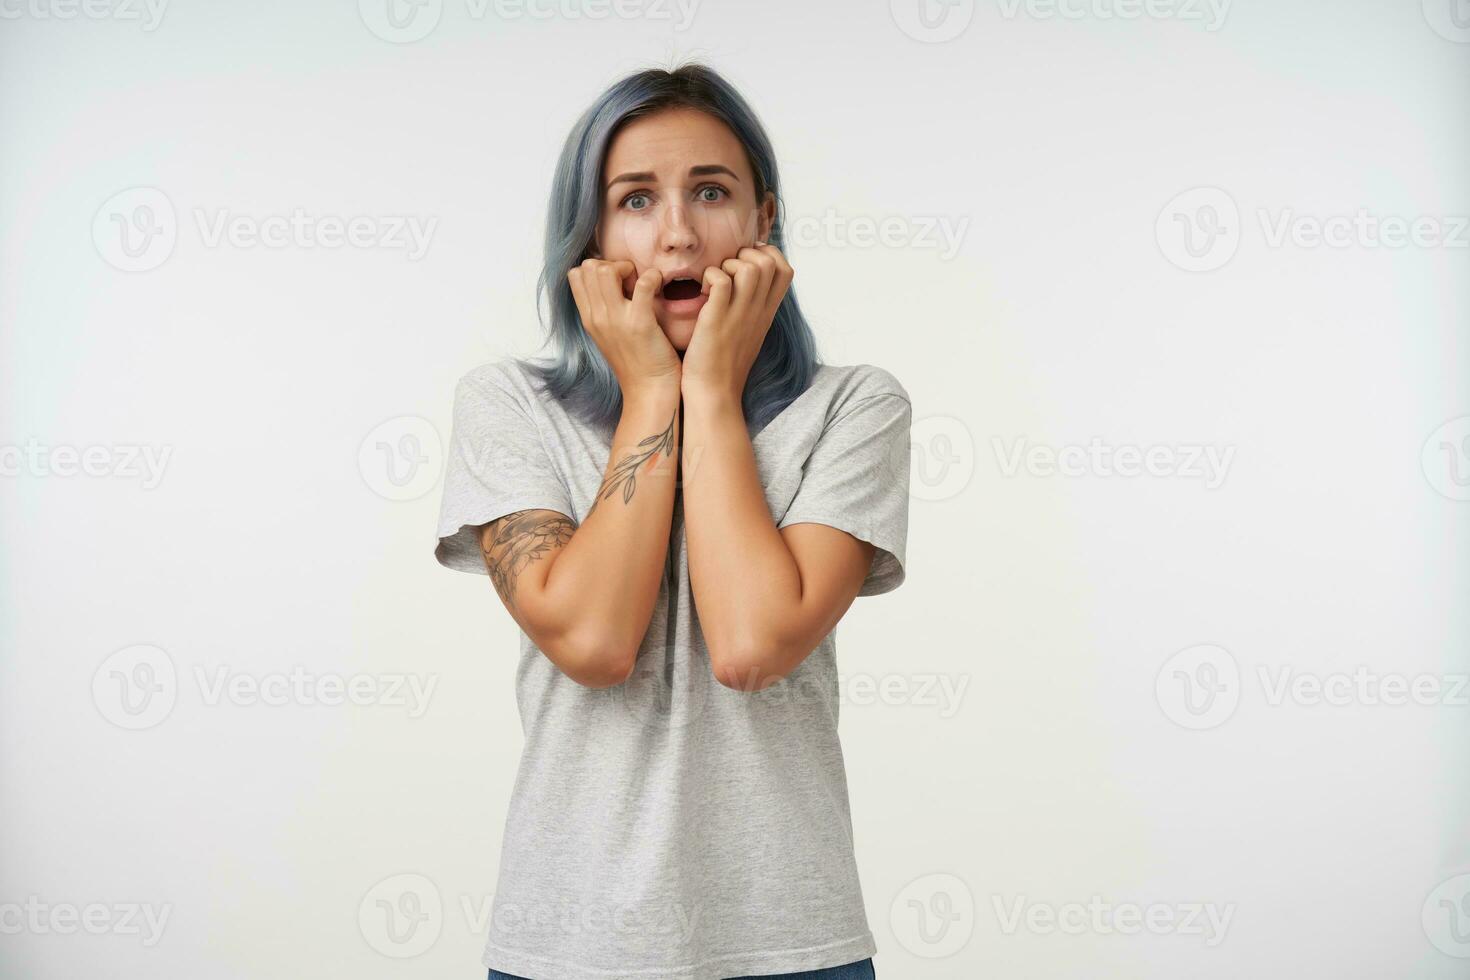 Frightened young attractive woman with short blue hair holding her face with raised hands while looking scaredly at camera, standing over white background photo